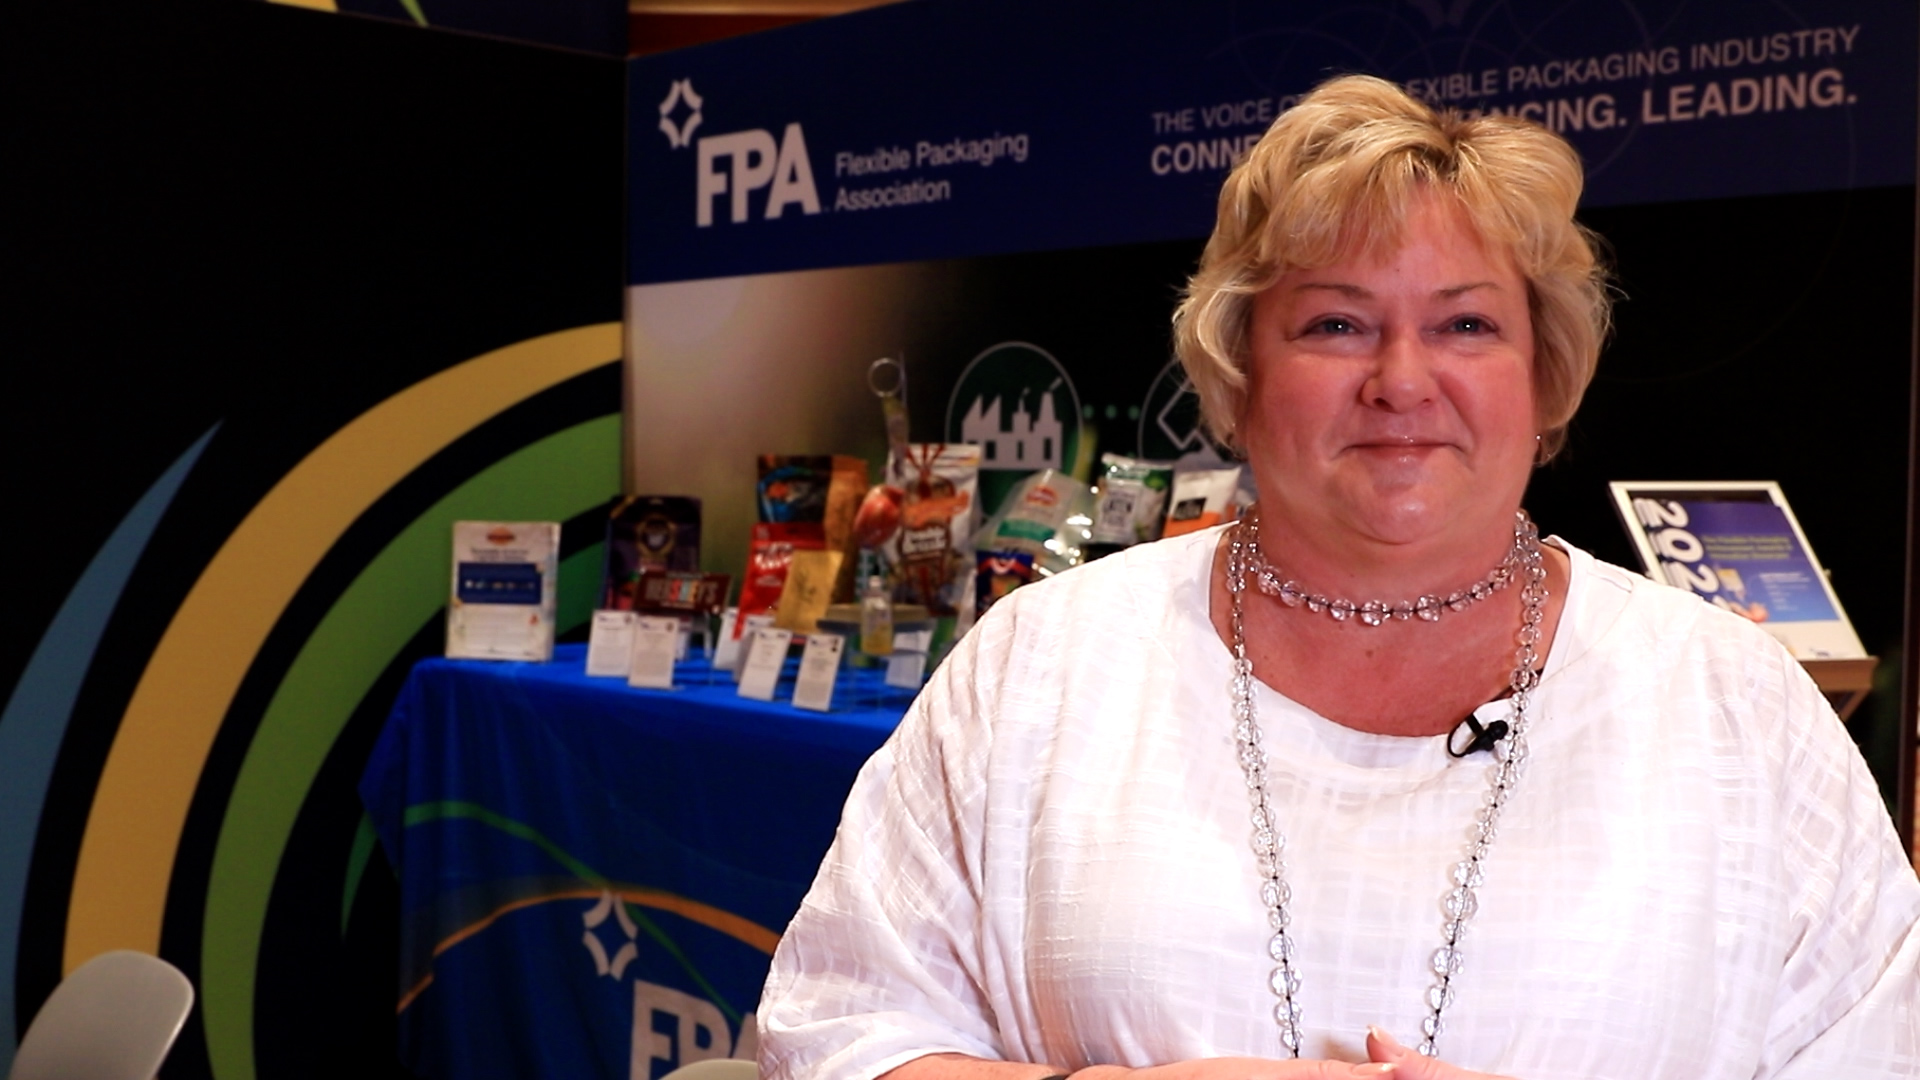 Video preview: FPA’s Alison Keane on Flexible Packaging Sustainability